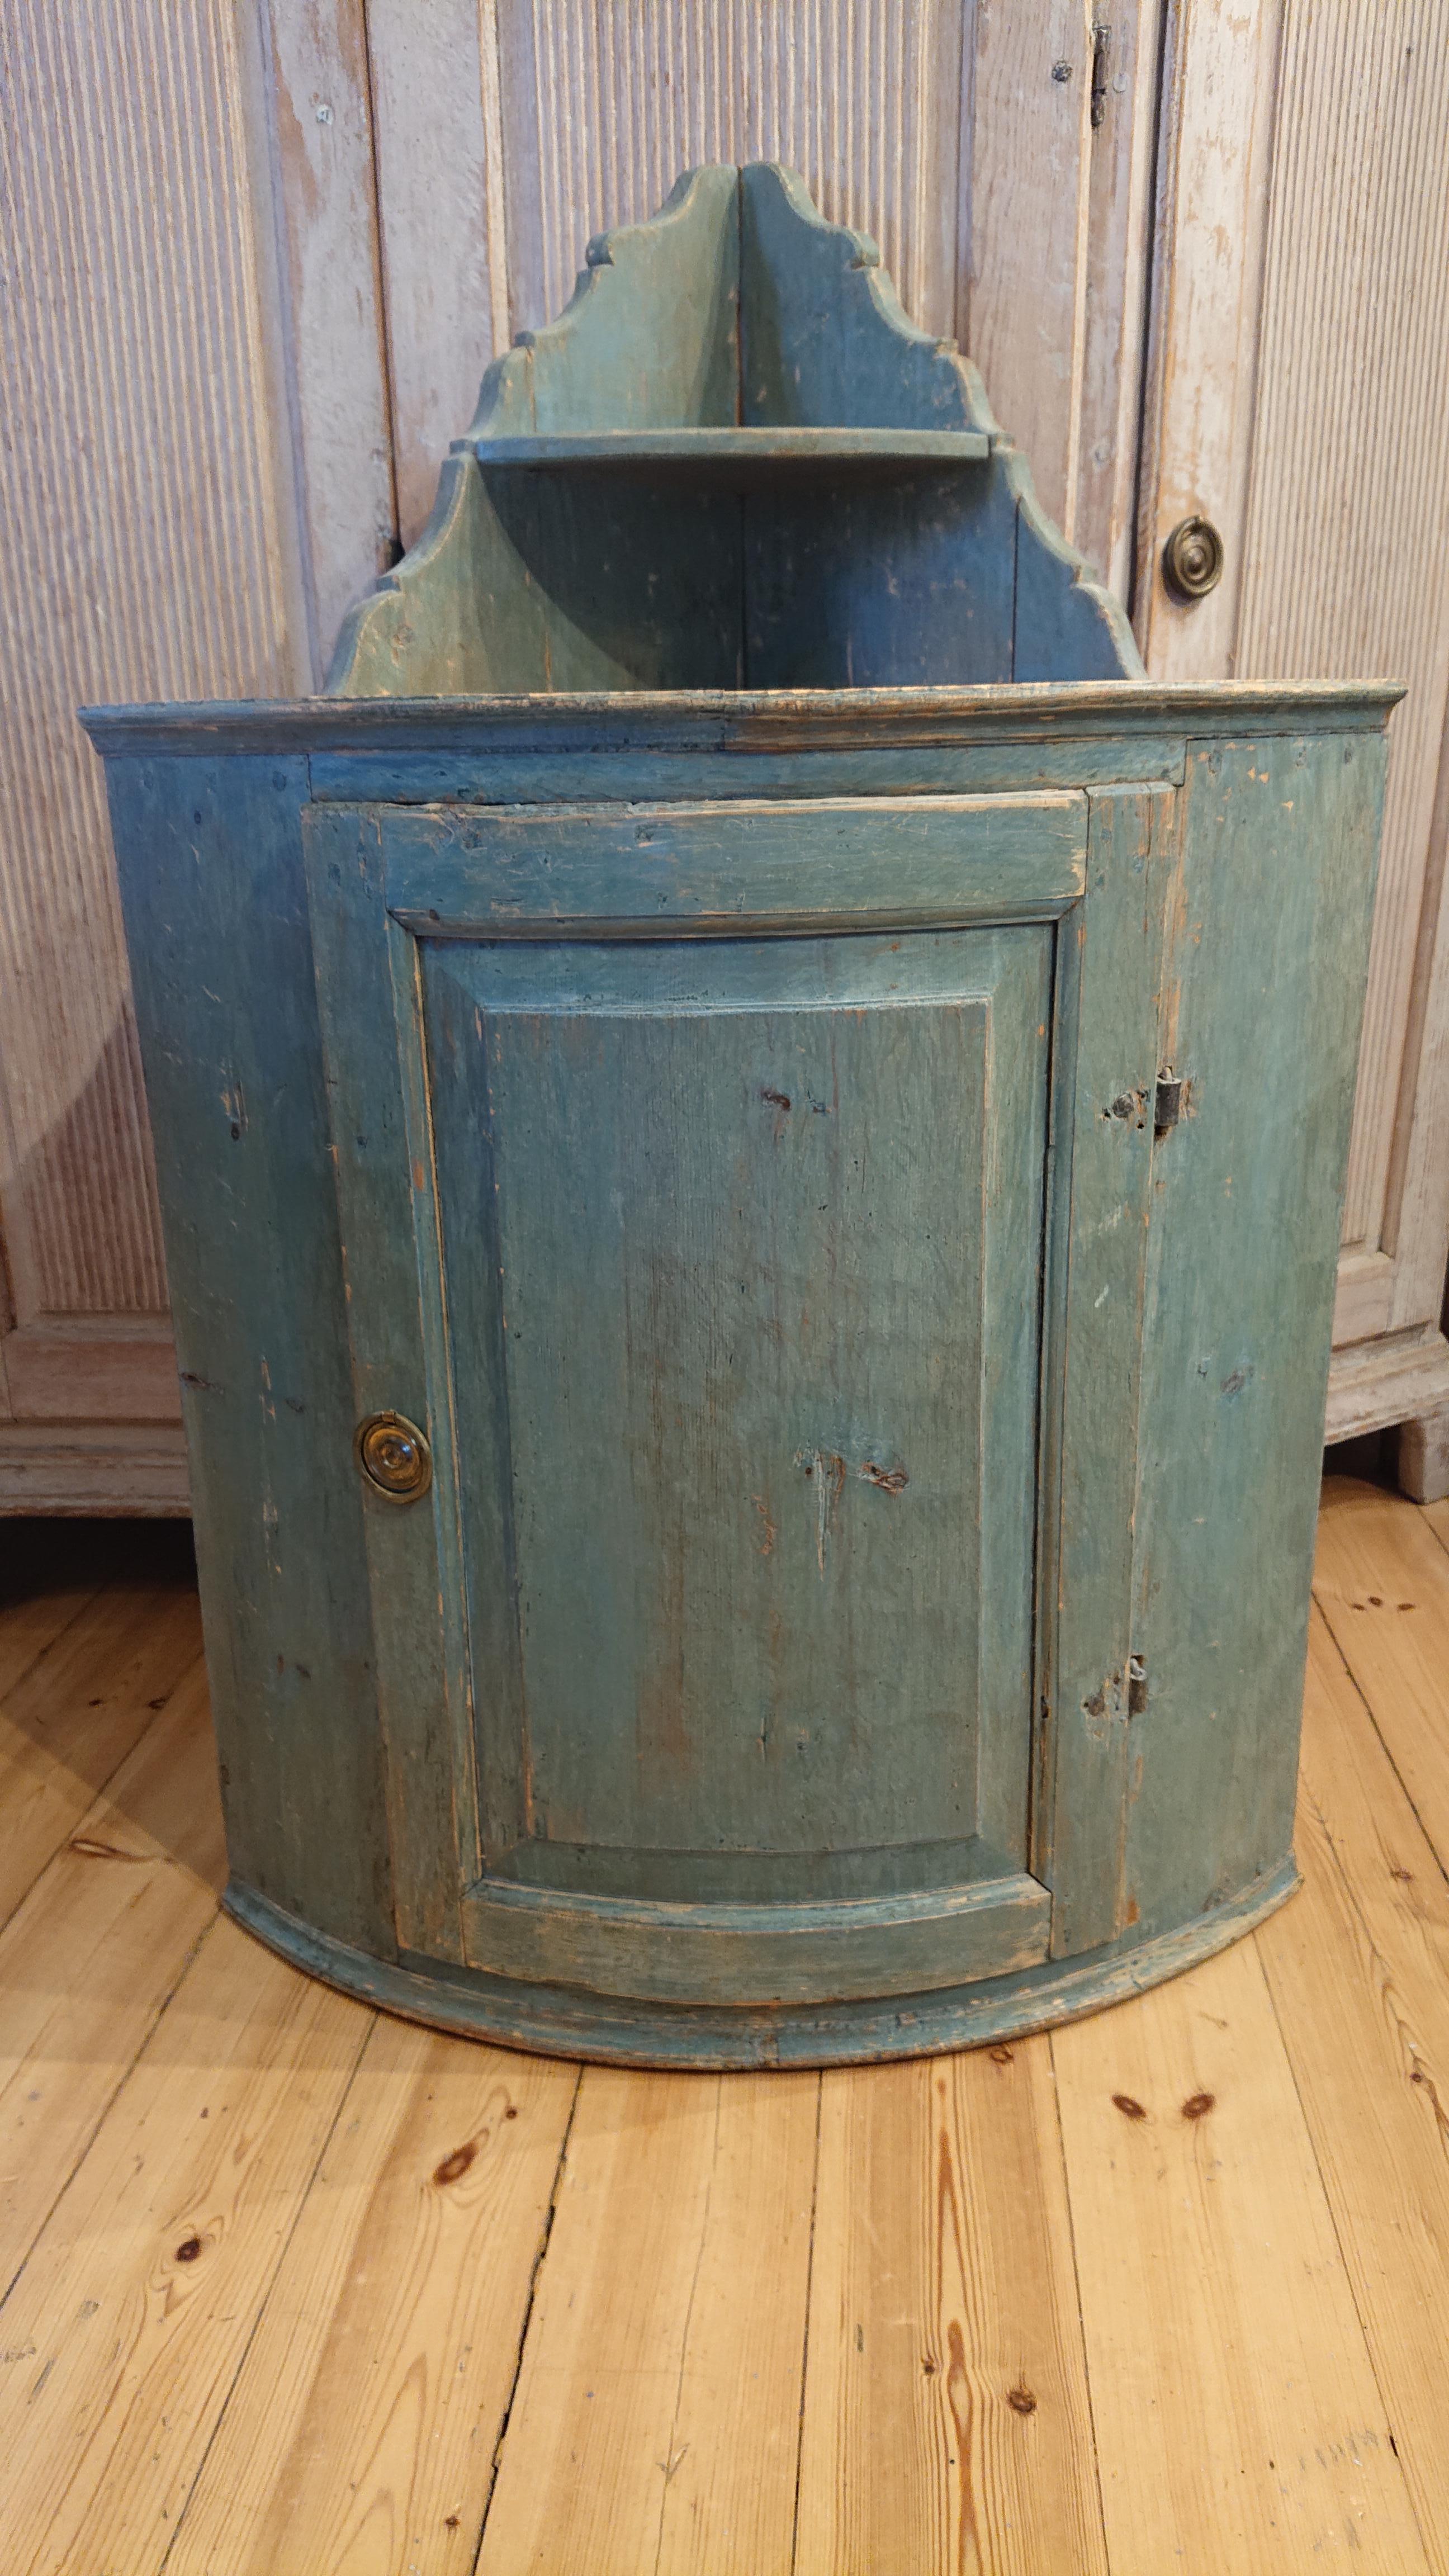 19th Century swedish Gustavian Hanging corner cabinet from Råneå Norrbotten, Northern Sweden.
A beautiful cabinet scraped by hand to its well preserved original paint.
Stunning blue color
Nice storage inside.
Beautiful shelves at the top with